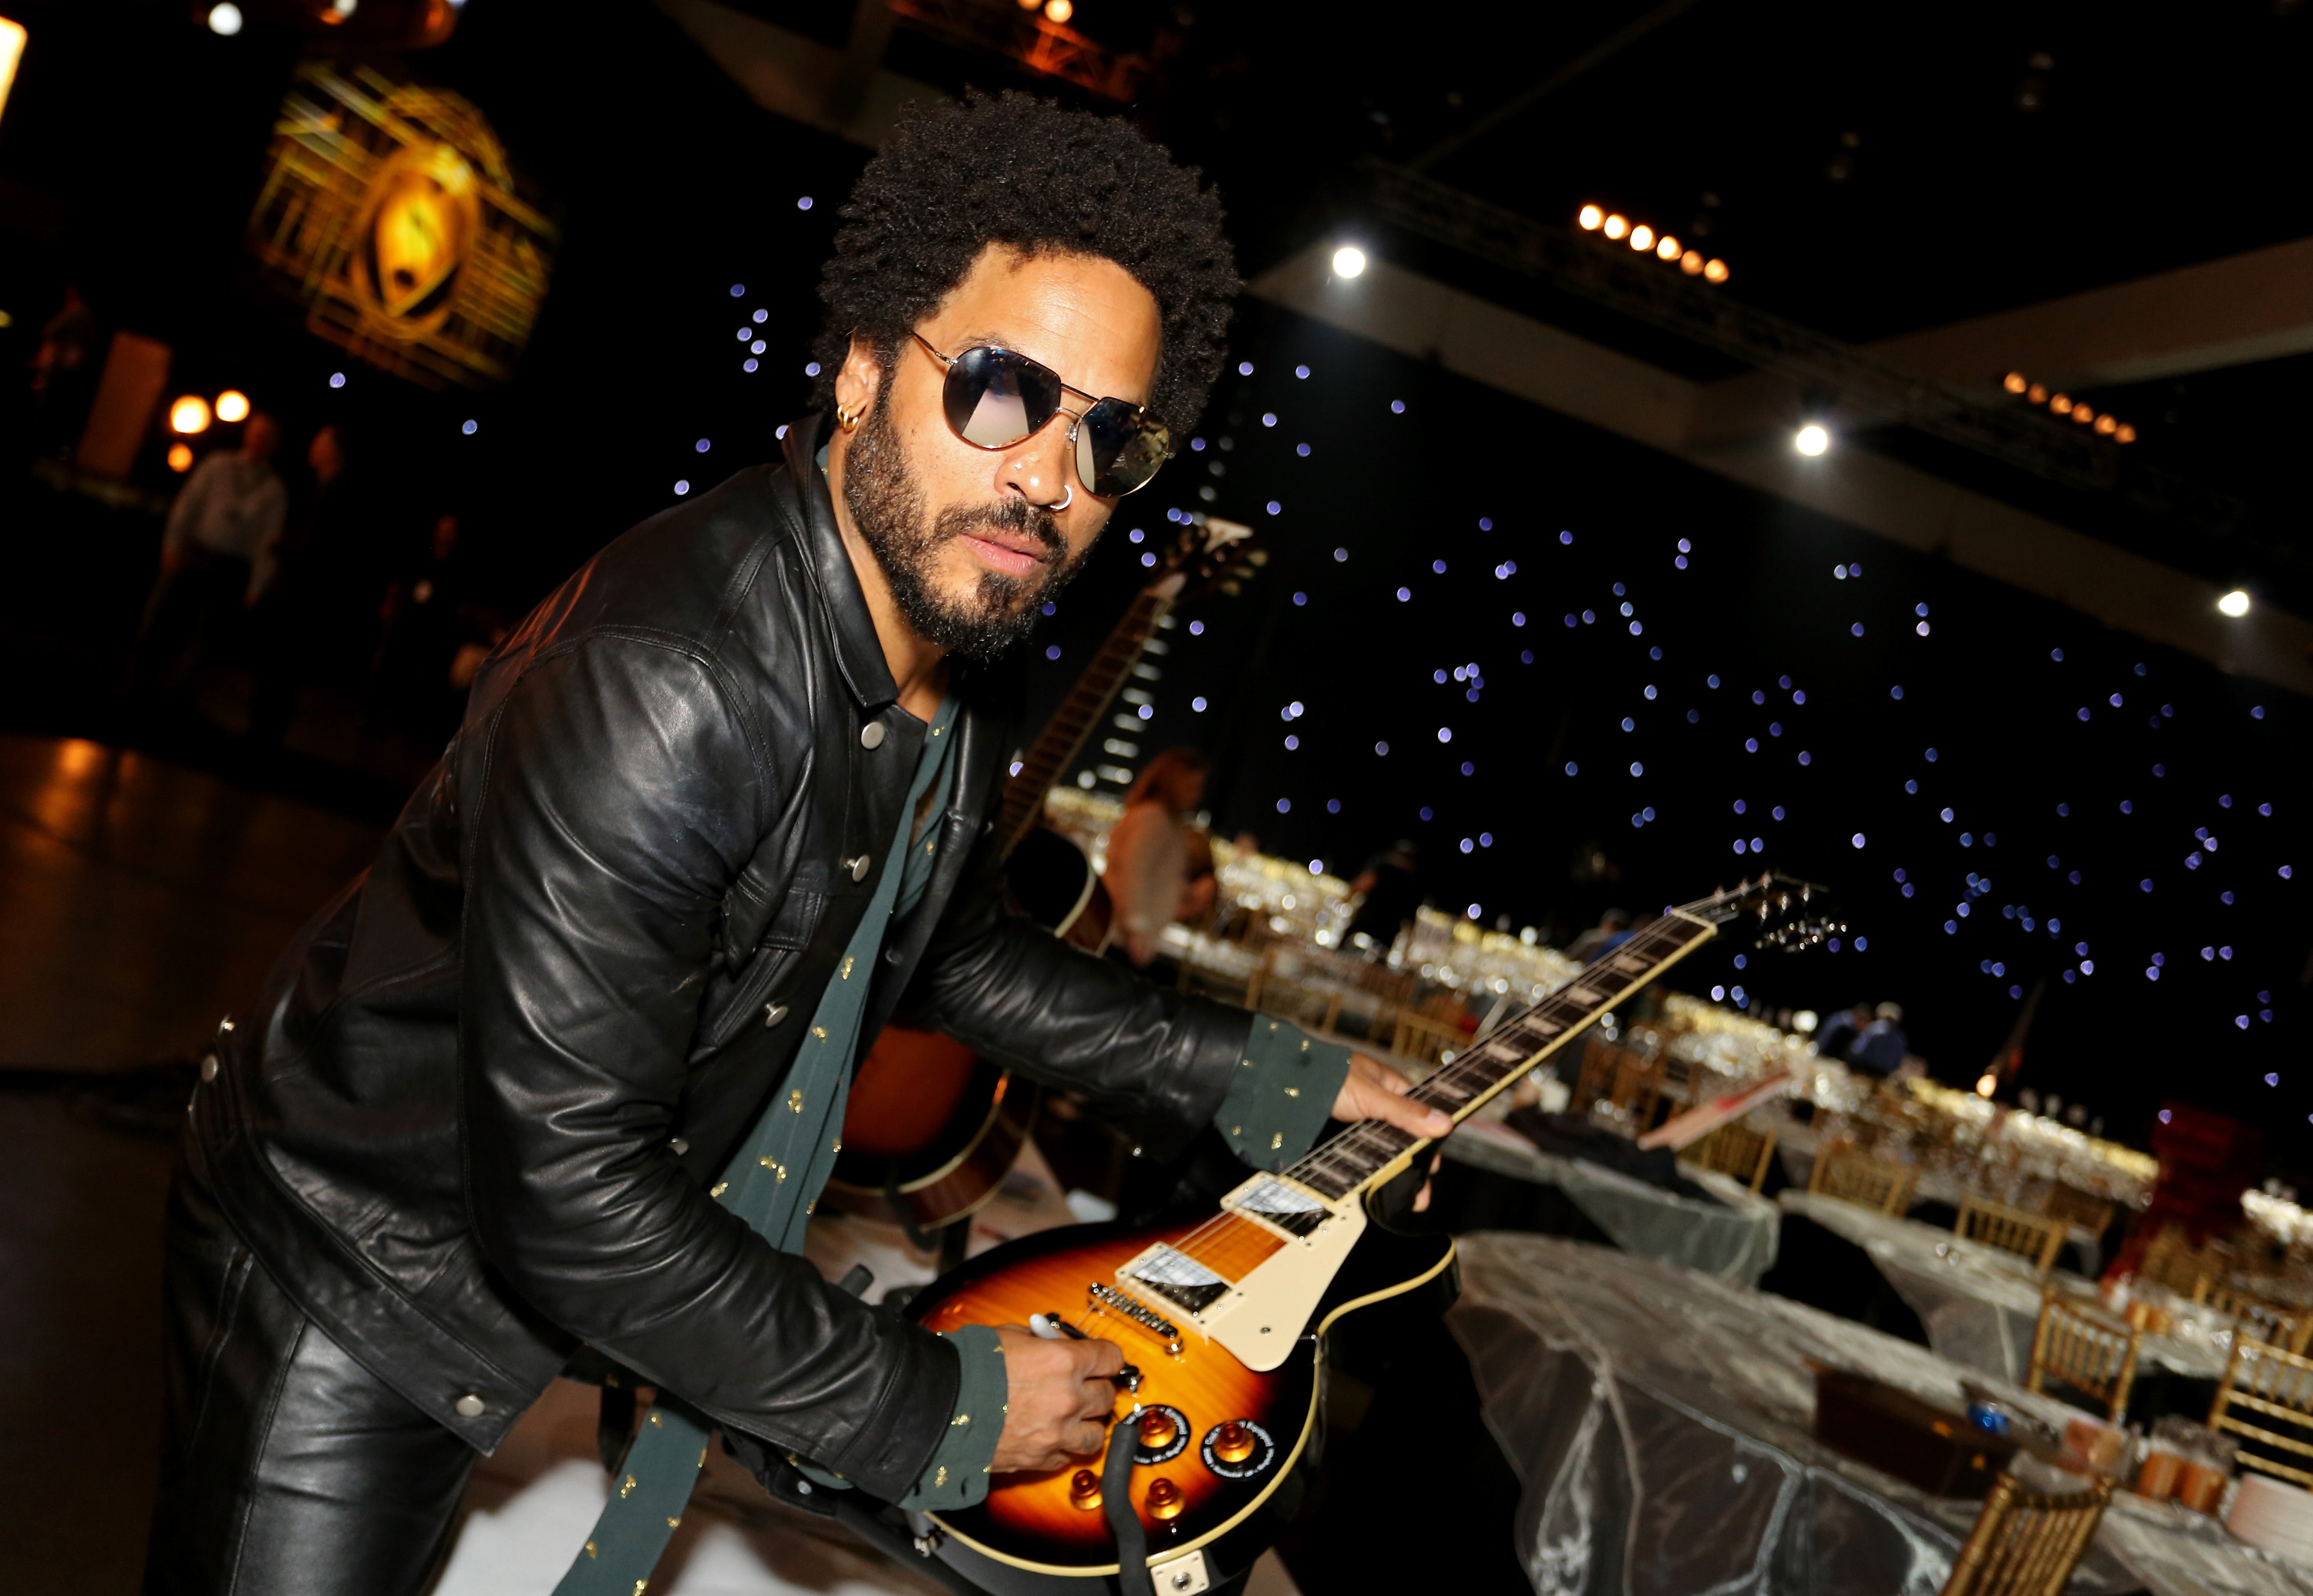 LOS ANGELES, CA - FEBRUARY 12: Musician Lenny Kravitz attends the charities signings during the 2016 MusiCares Person Of The Year honoring Lionel Richie at Los Angeles Convention Center on February 12, 2016 in Los Angeles City. (Photo by Rachel Murray/WireImage)